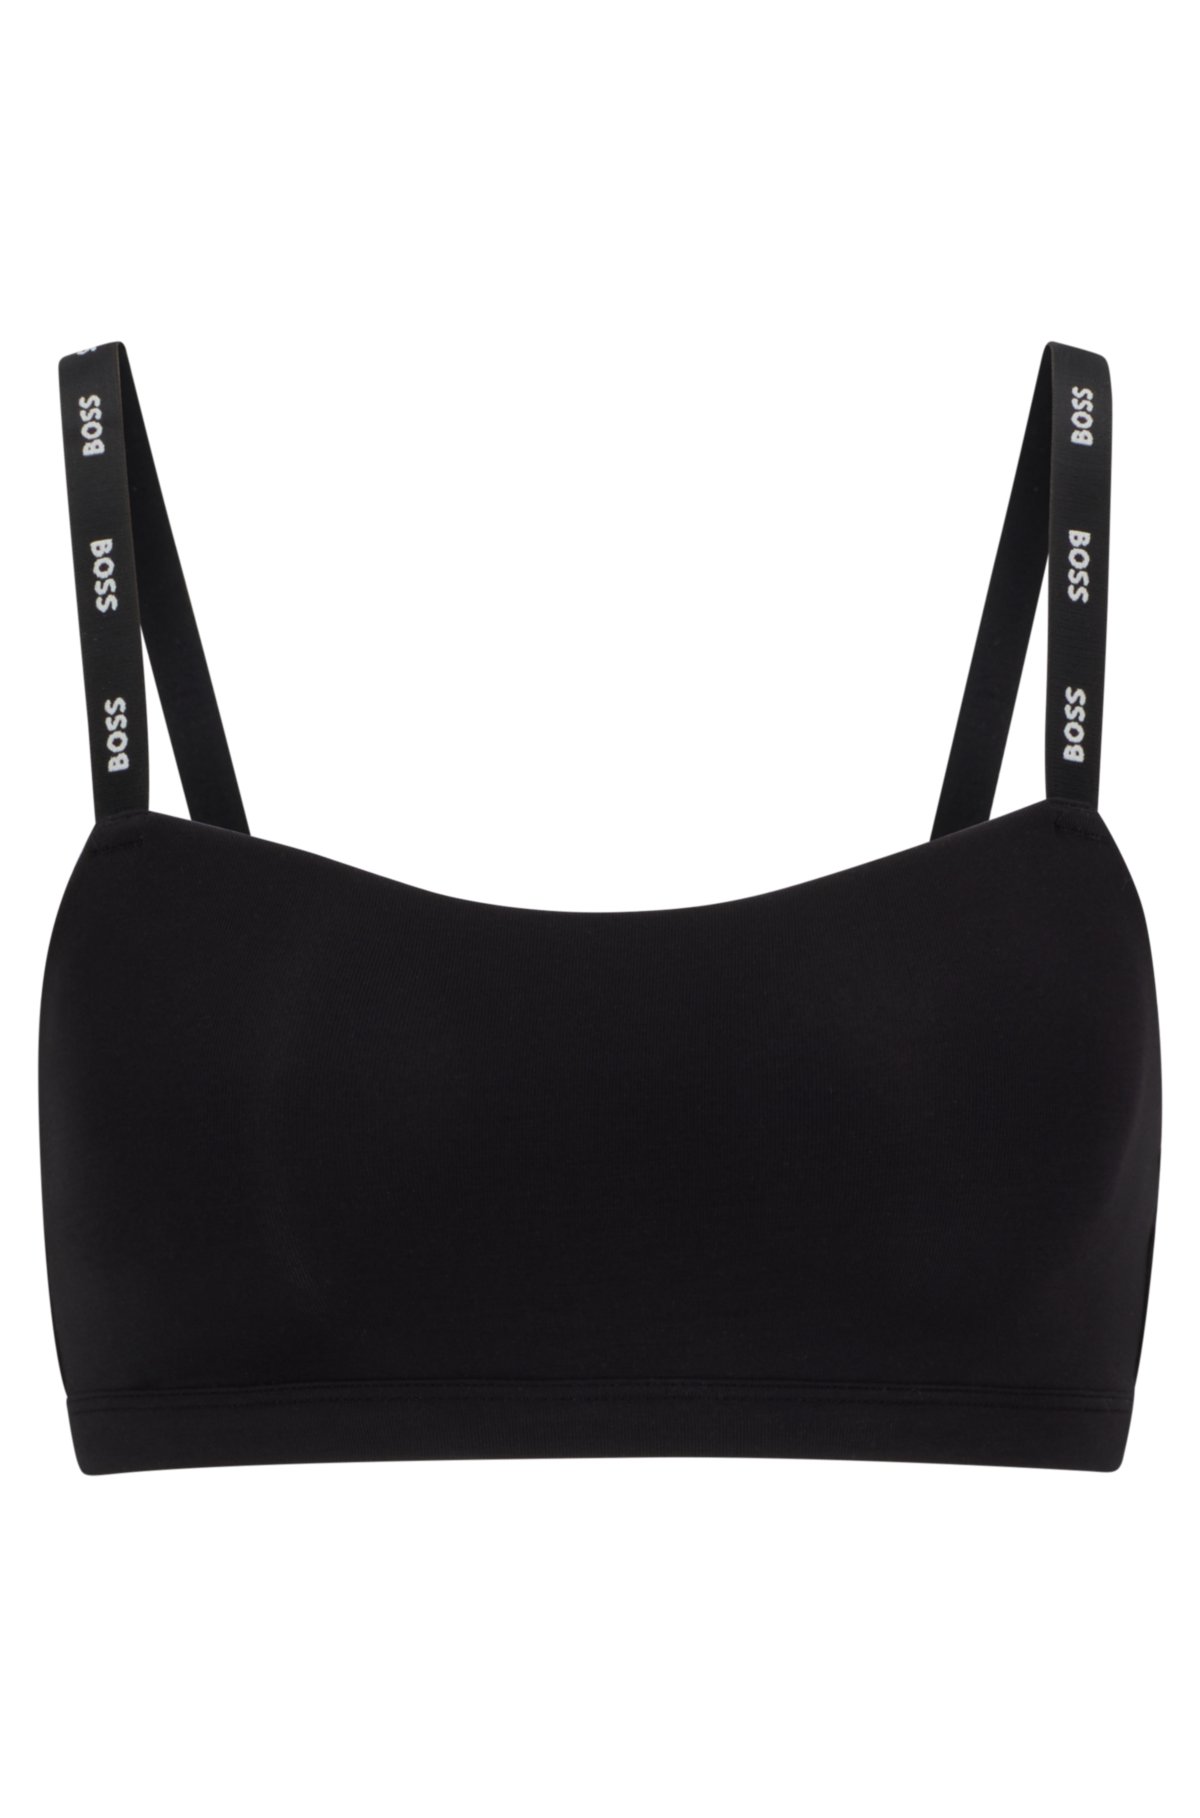 BOSS - straps bralette branded with Stretch-jersey